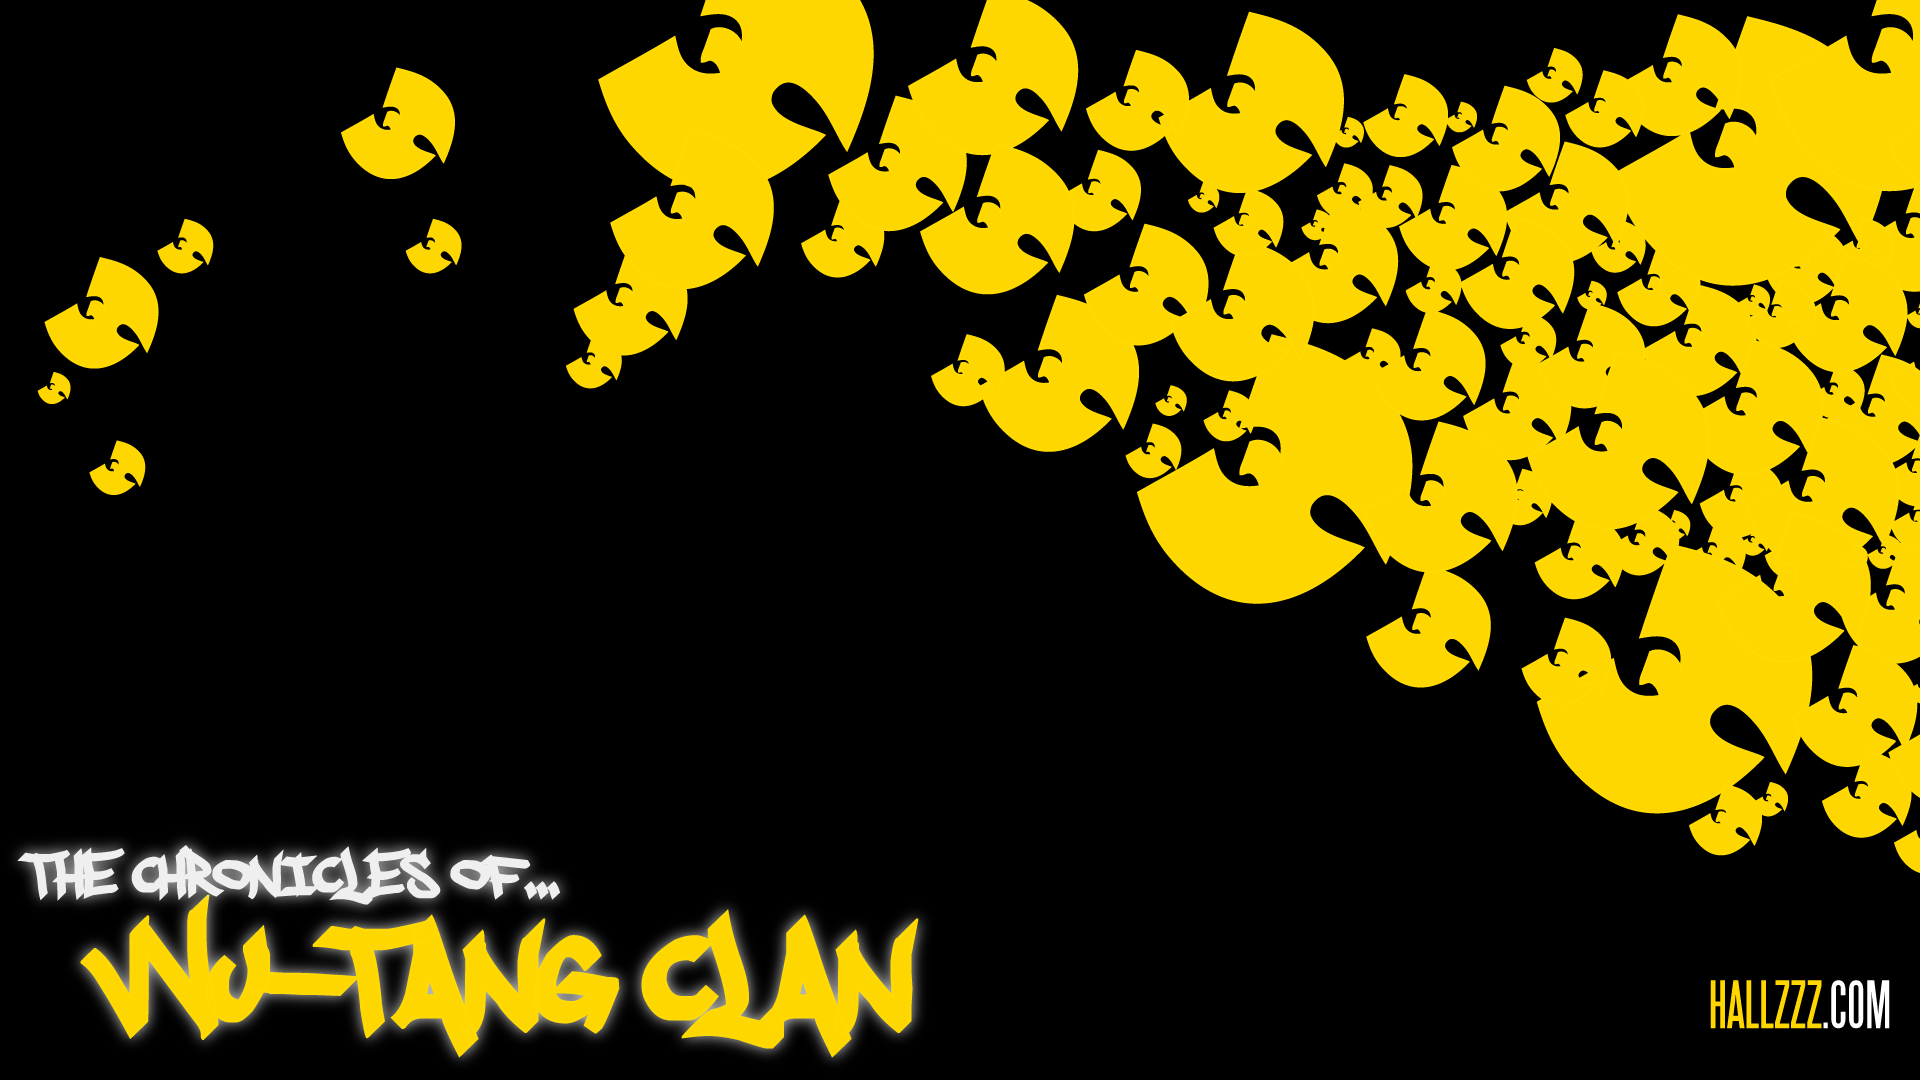 Wallpapers Wutang Wu Tang Clan By Hallzzz The Spill Moviemunity Px